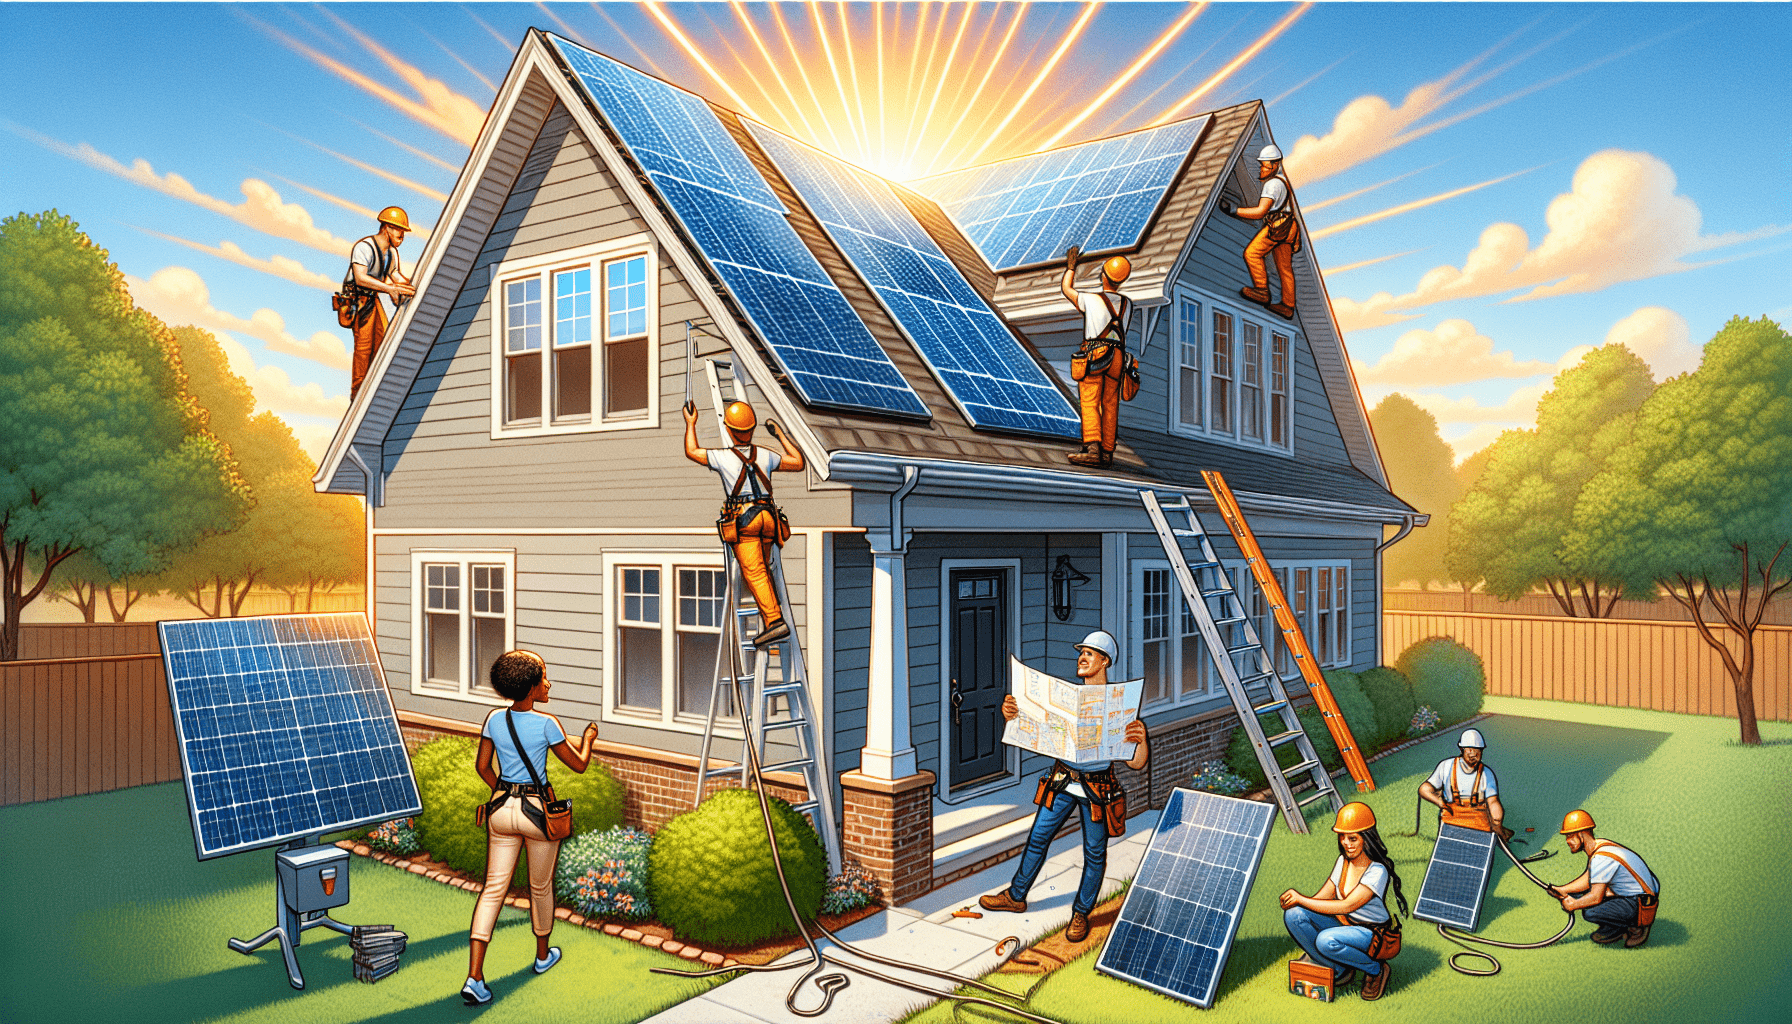 What Are The First Steps To Transitioning Your Home To Solar Power?